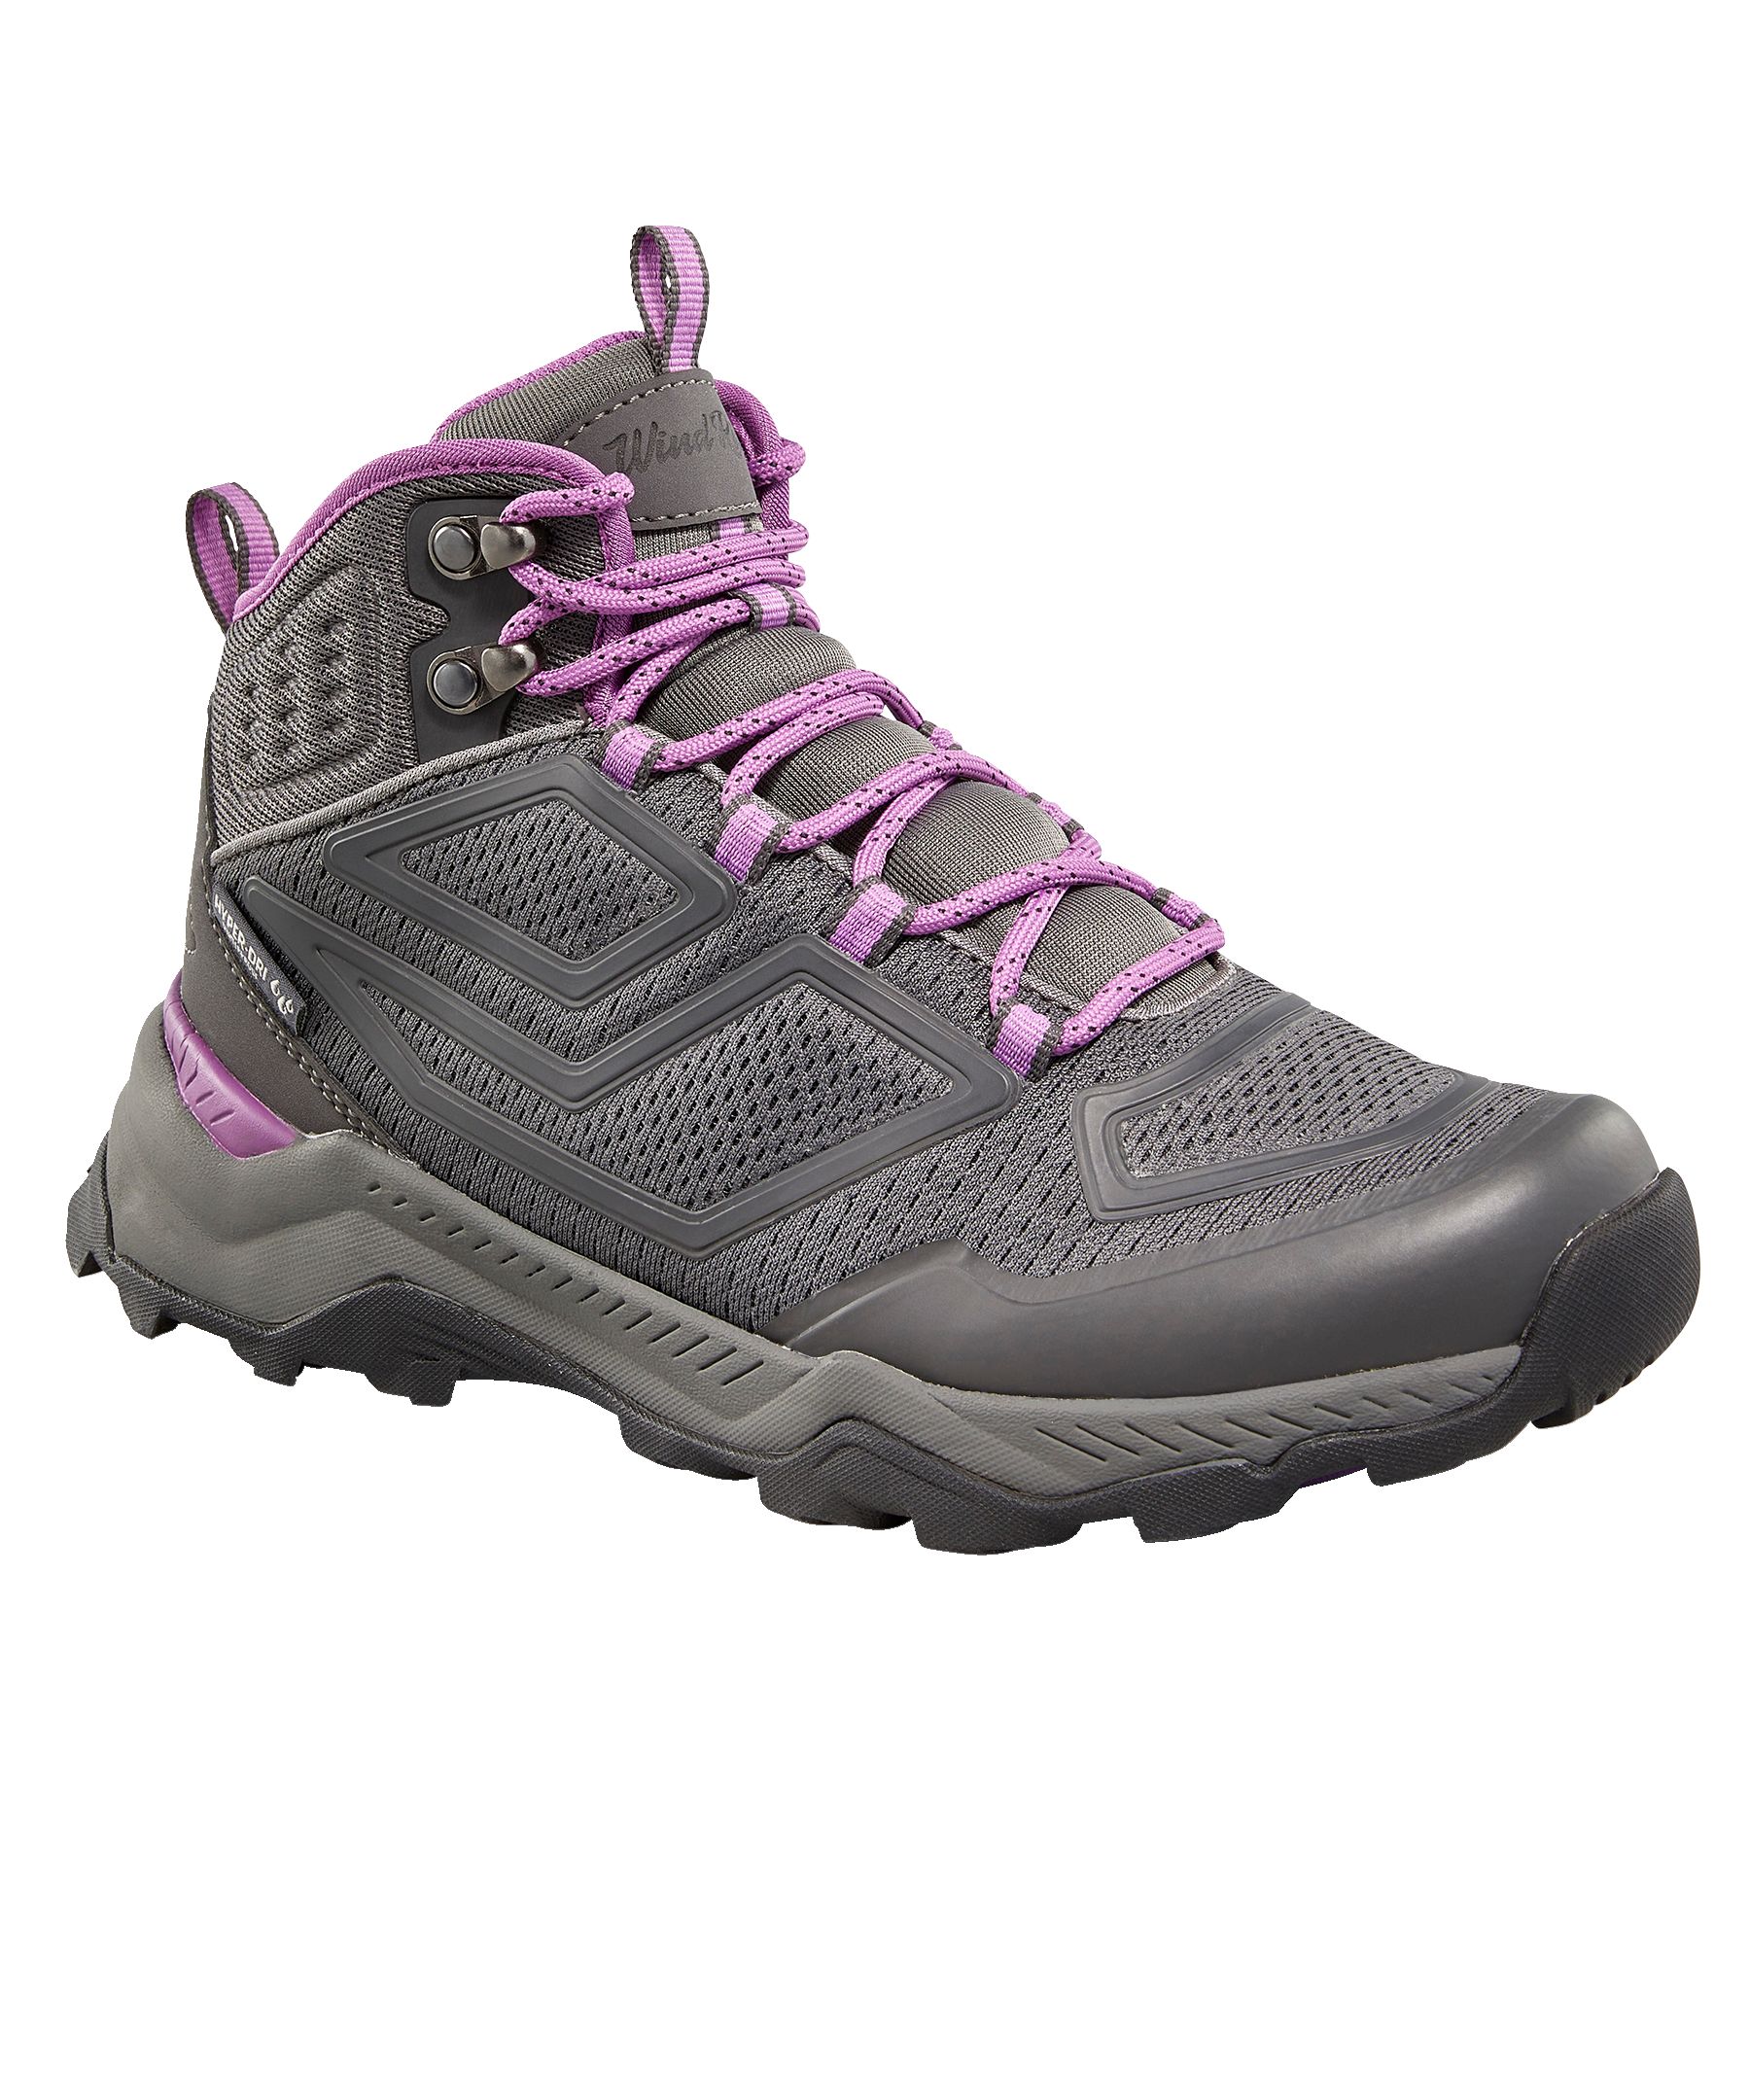 WindRiver Women's Canmore Mid-Cut Hiking Boots | Marks